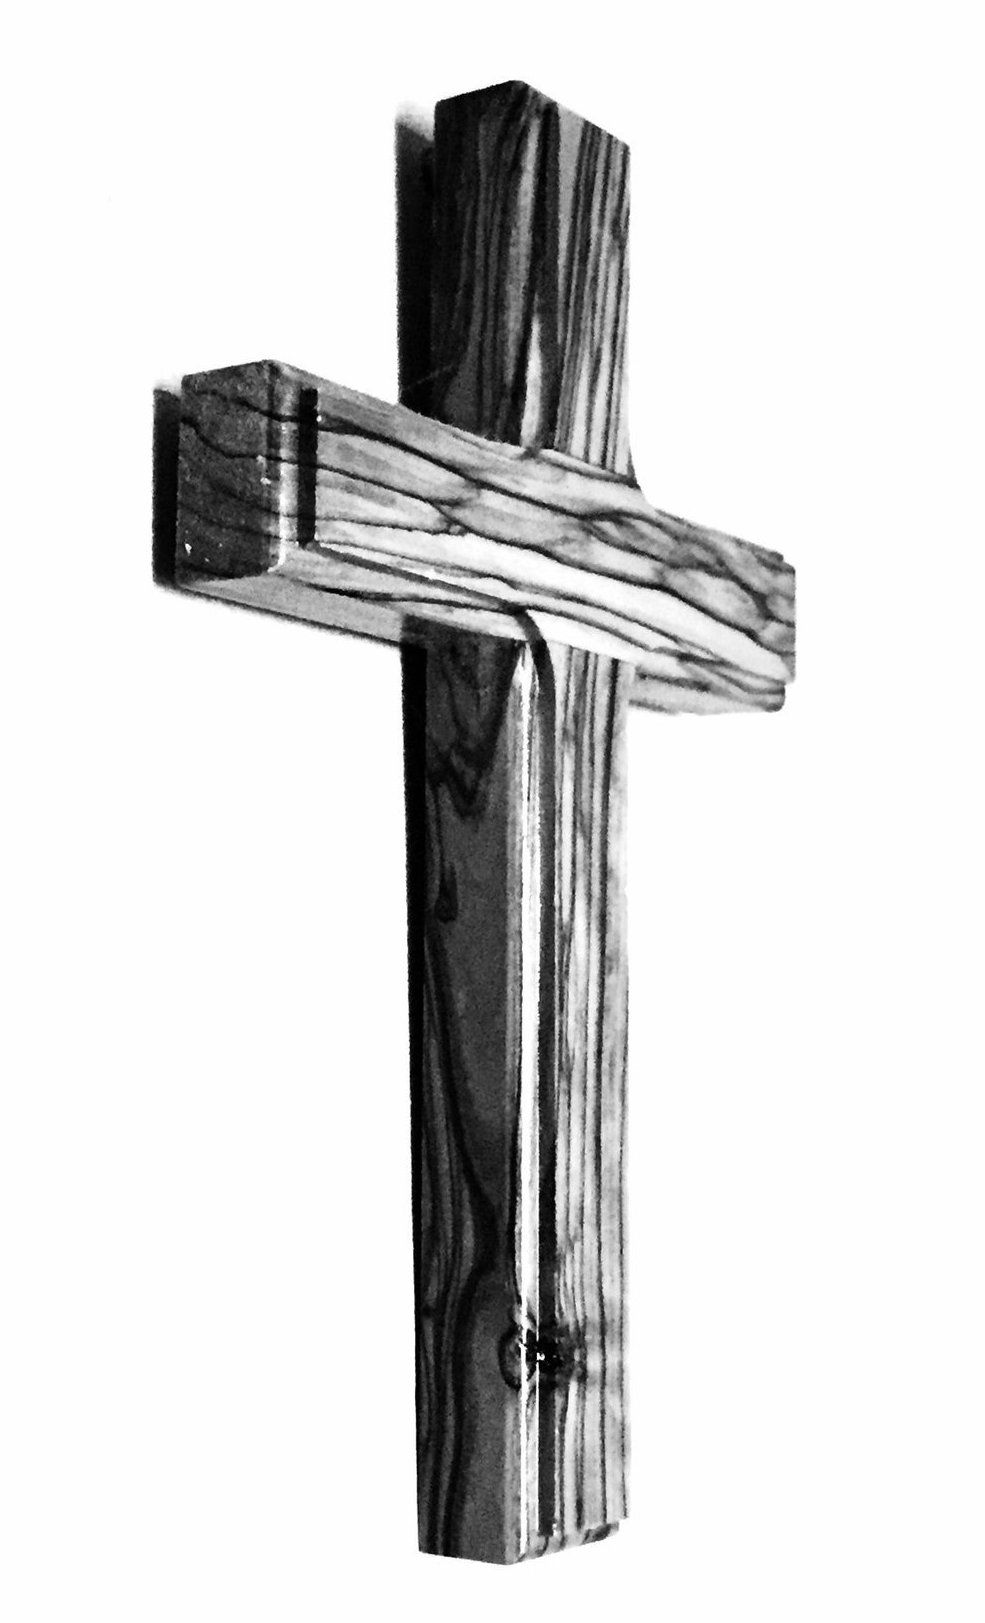 A black and white photo of a wooden cross on a white background.